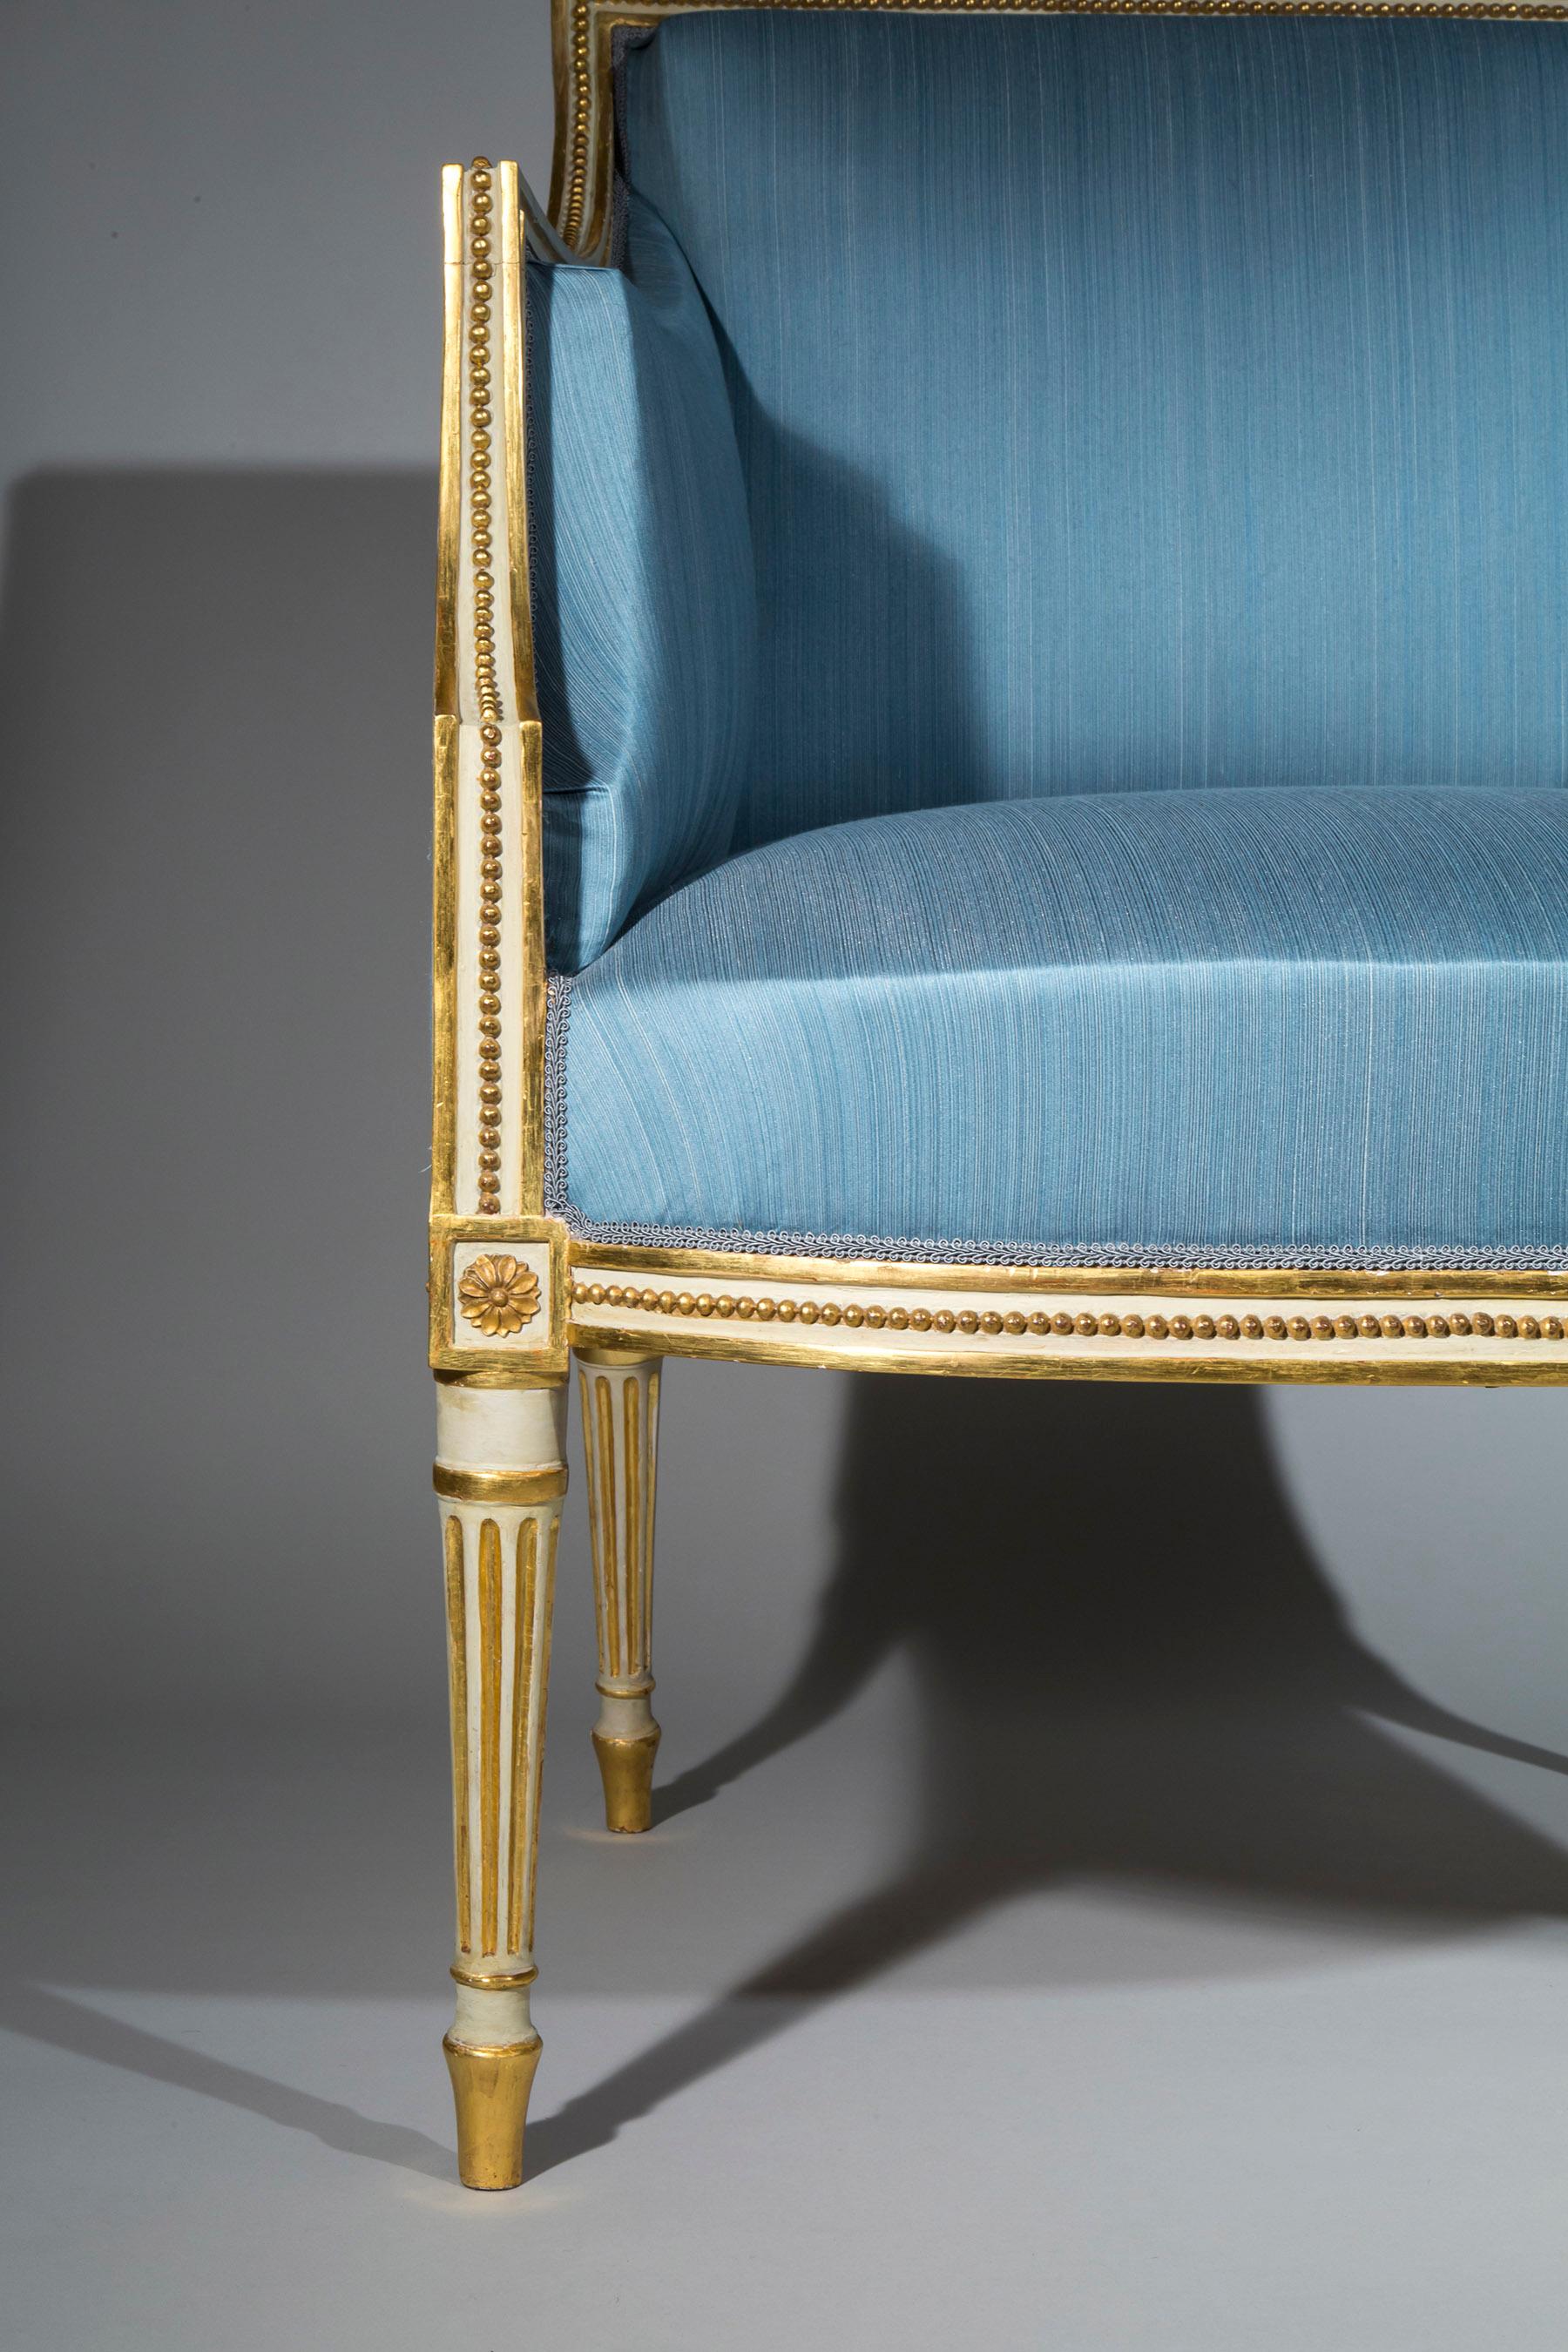 An exceptional George III period pair of cream-japanned and parcel-gilt armchairs, in the manner of Francois Hervé.

English, circa 1790.

A related pair of George III painted and parcel-gilt open armchairs, similarly decorated in the manner